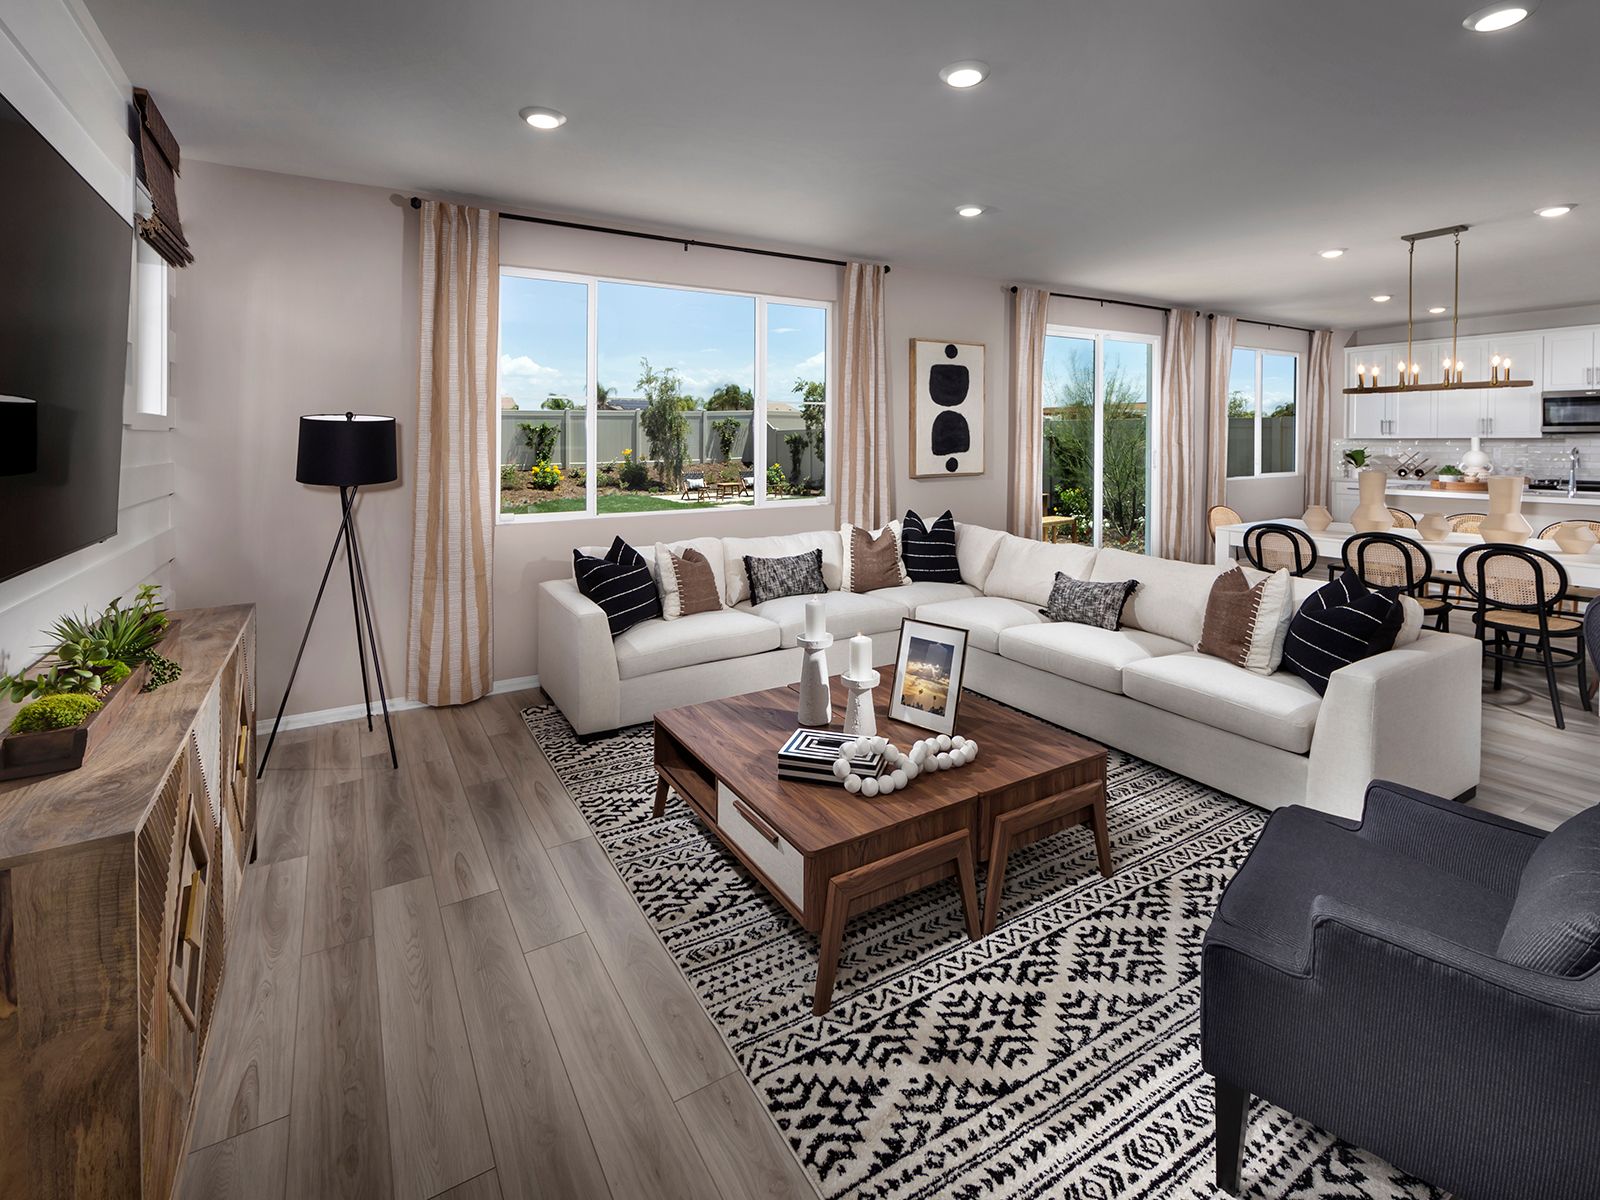 Entertain friends and family in the open-concept living areas.